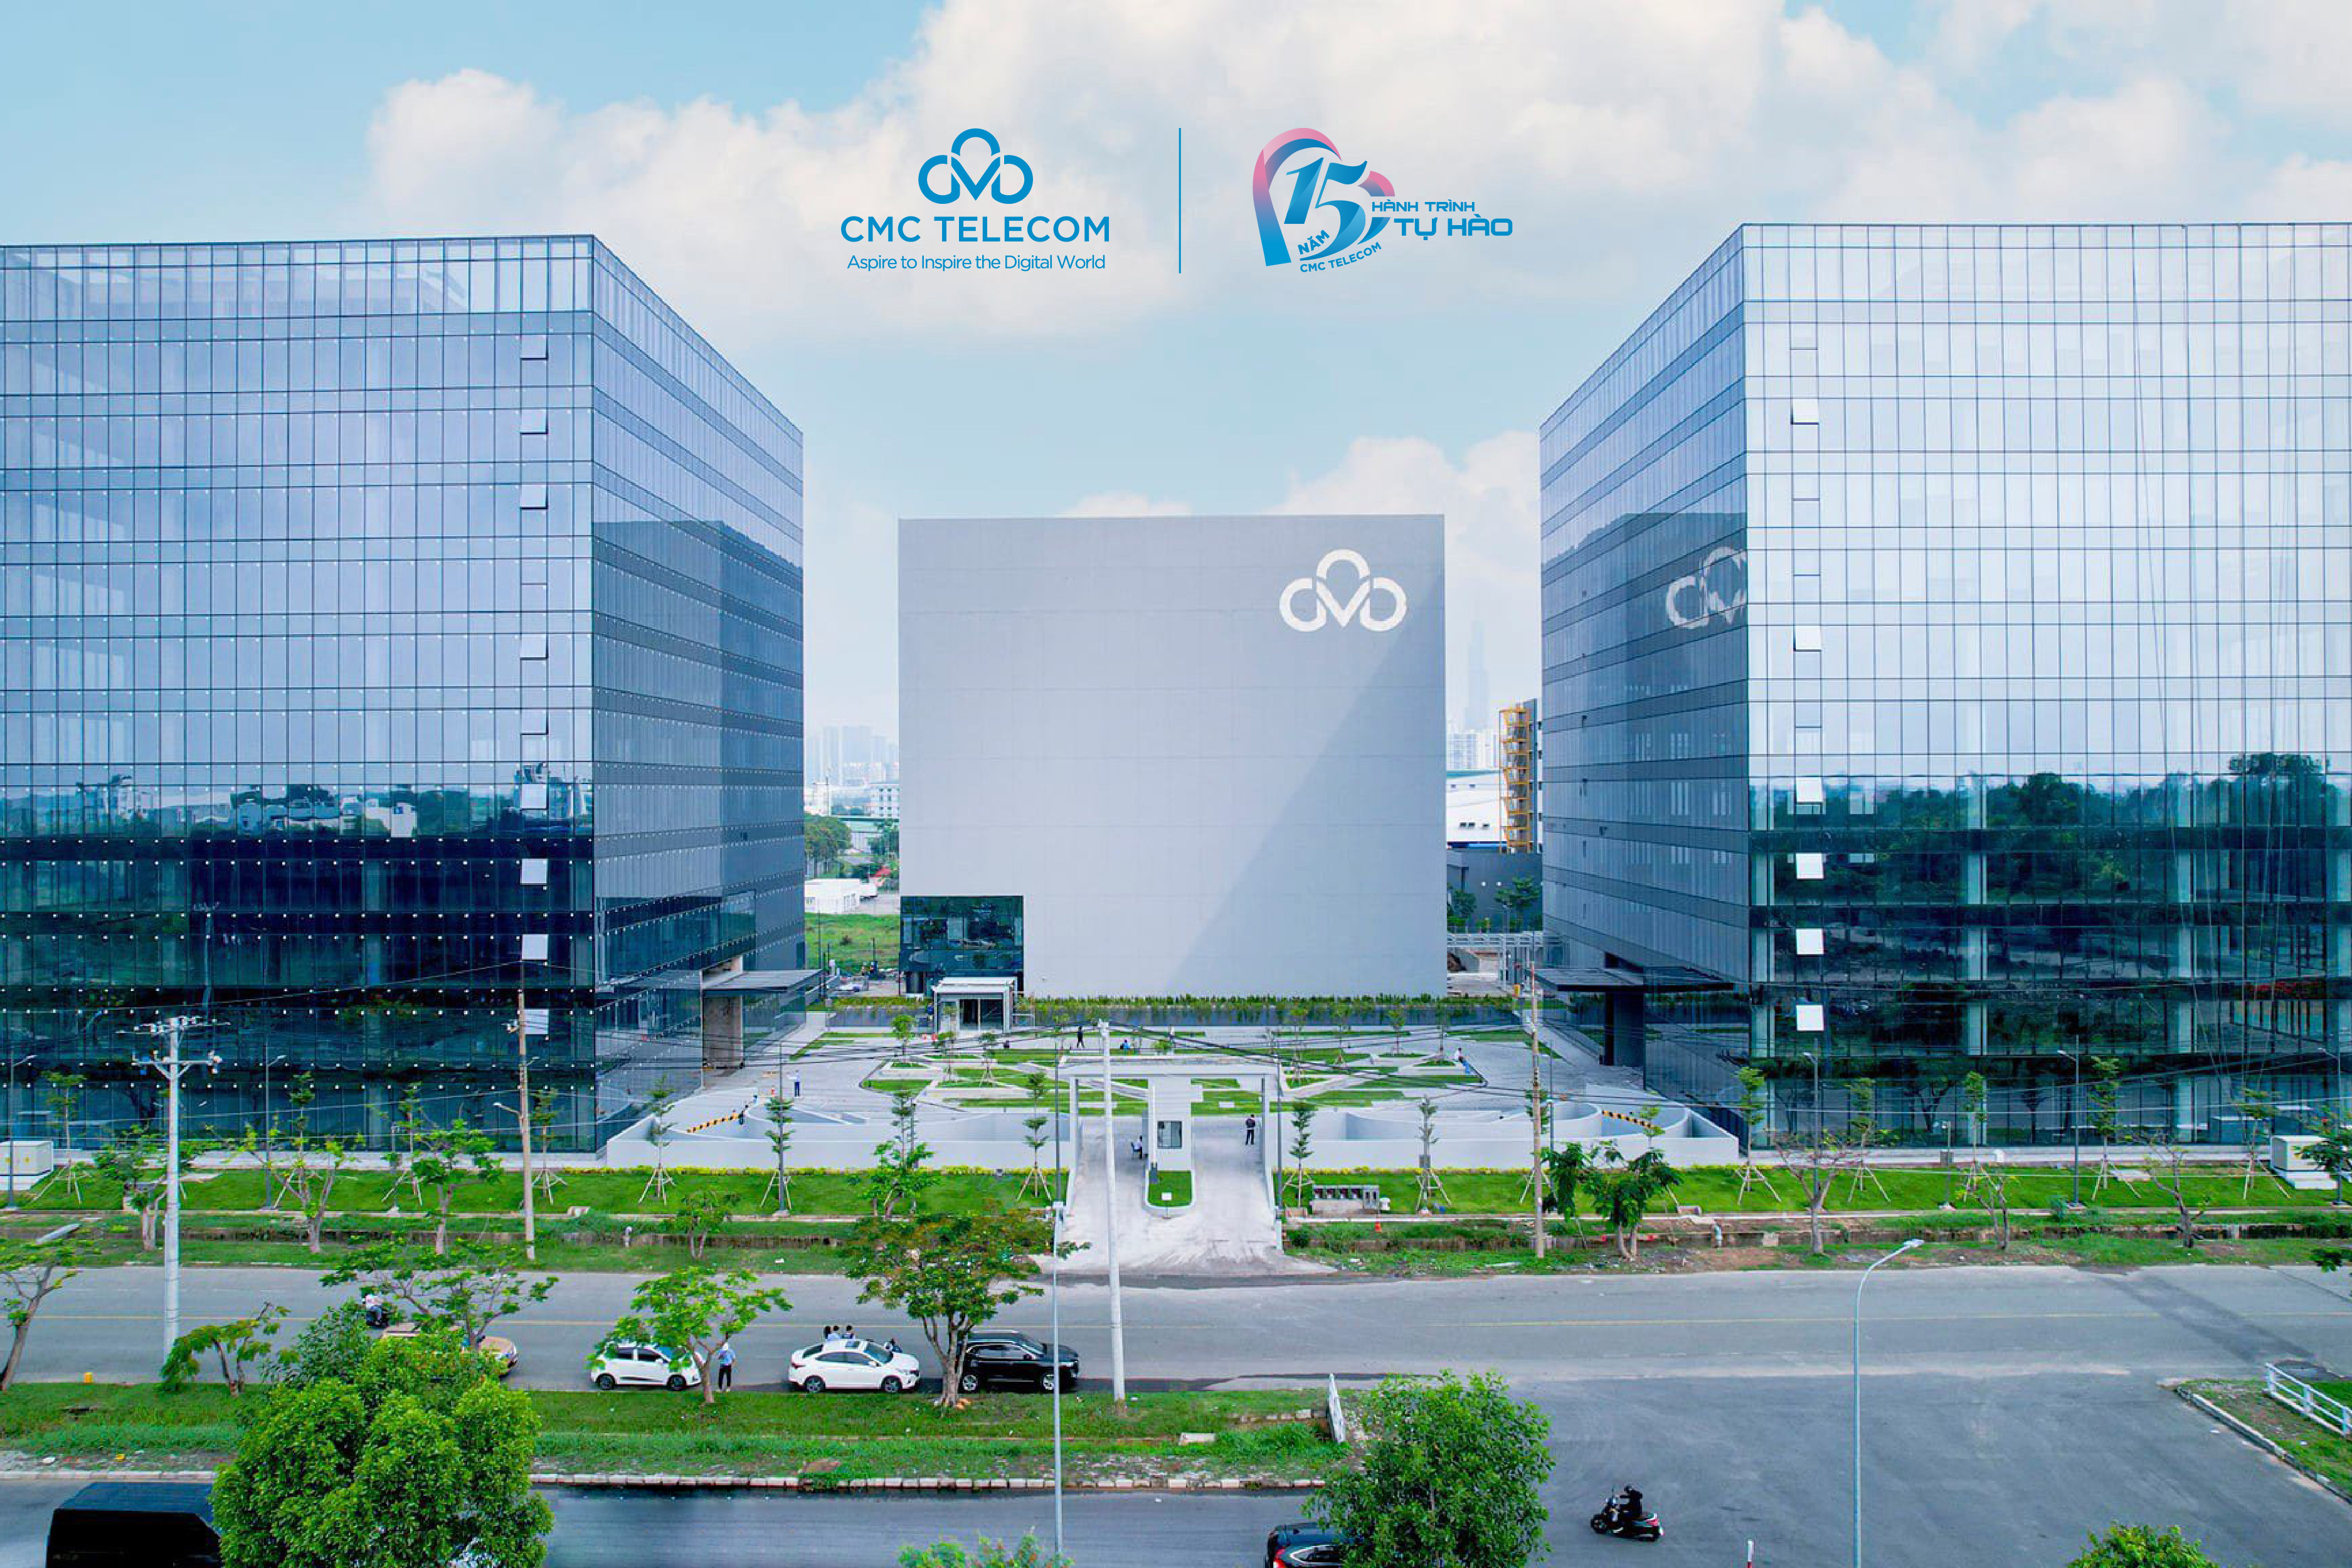 CMC Telecom becomes the leading Data Center Service Provider in Vietnam after 15 years of development